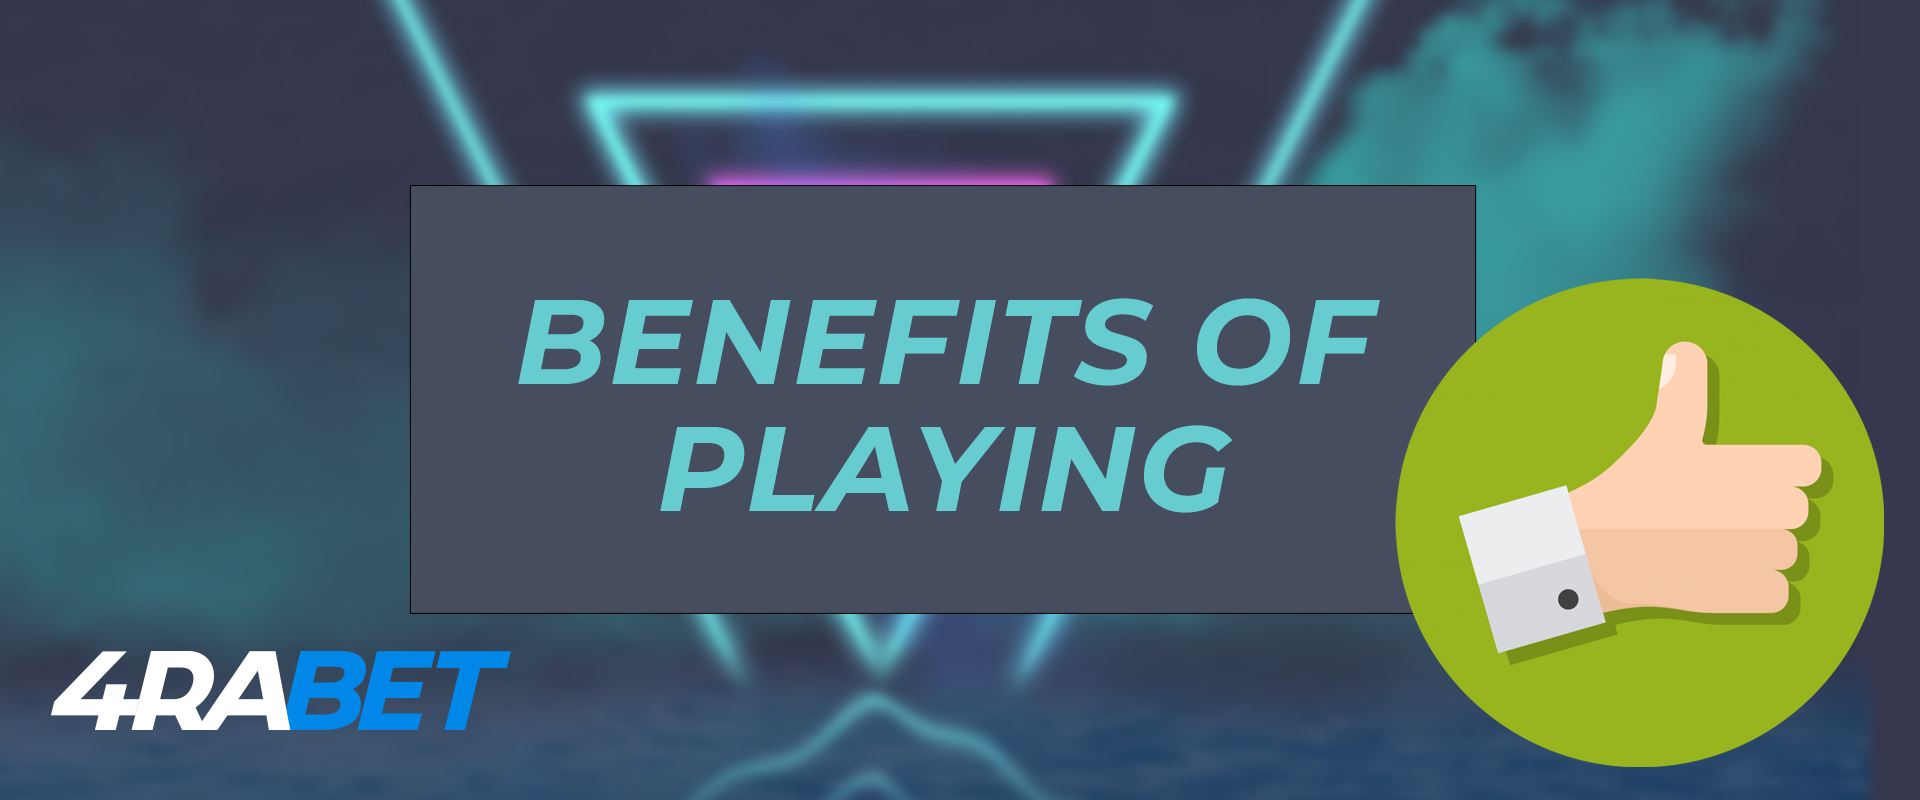 All benefits of playing on the 4rabet 